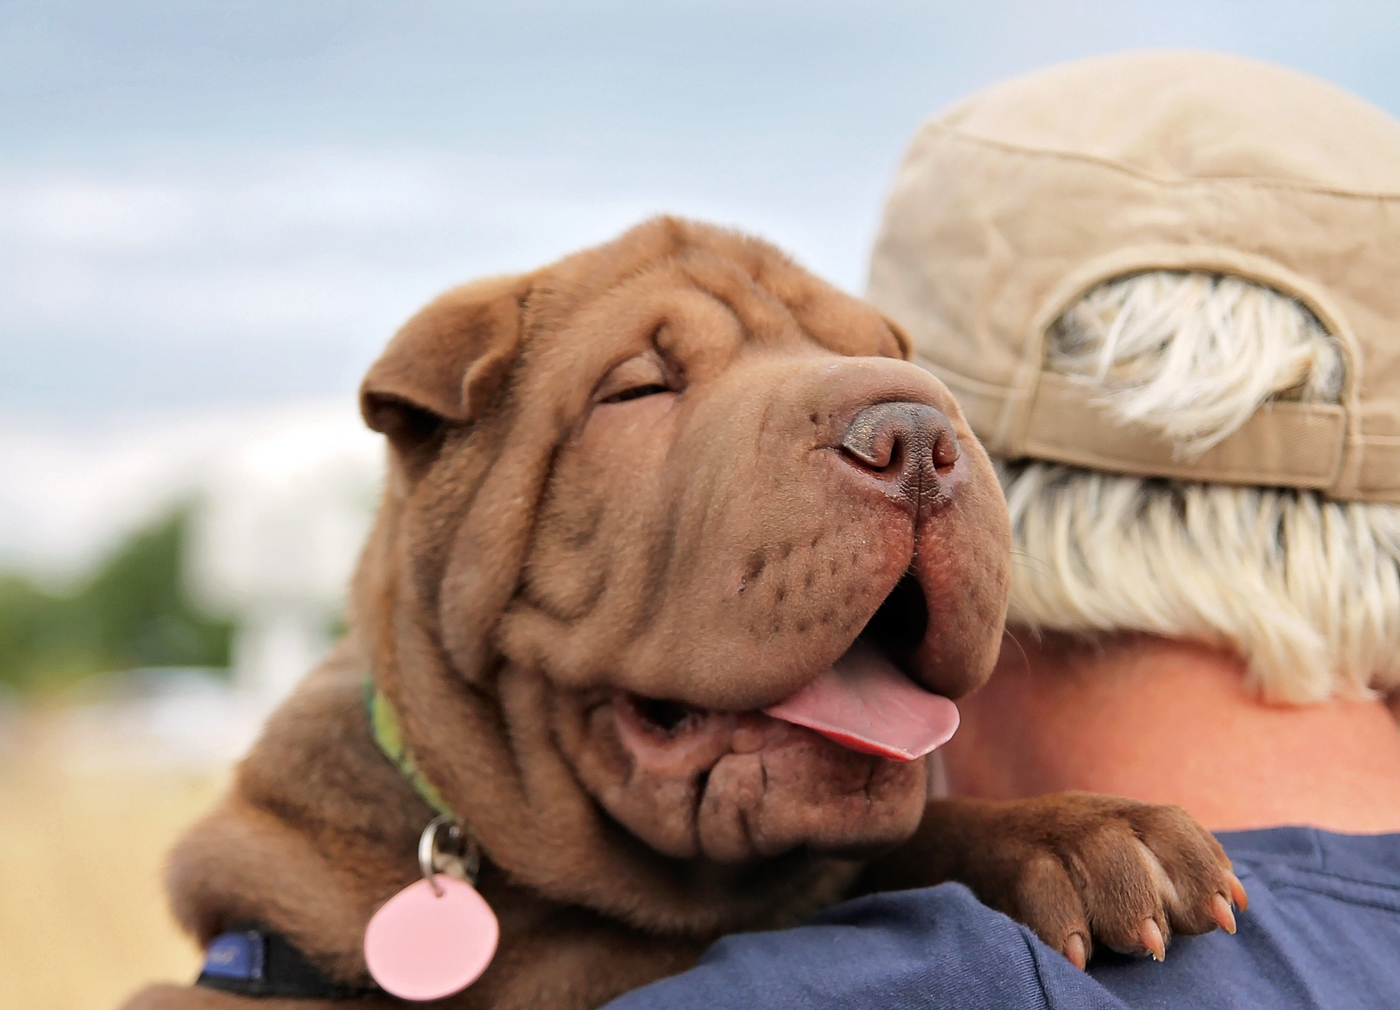 https://www.pethappylife.com/wp-content/uploads/2020/02/sharpei-puppy-being-held-SW.jpg